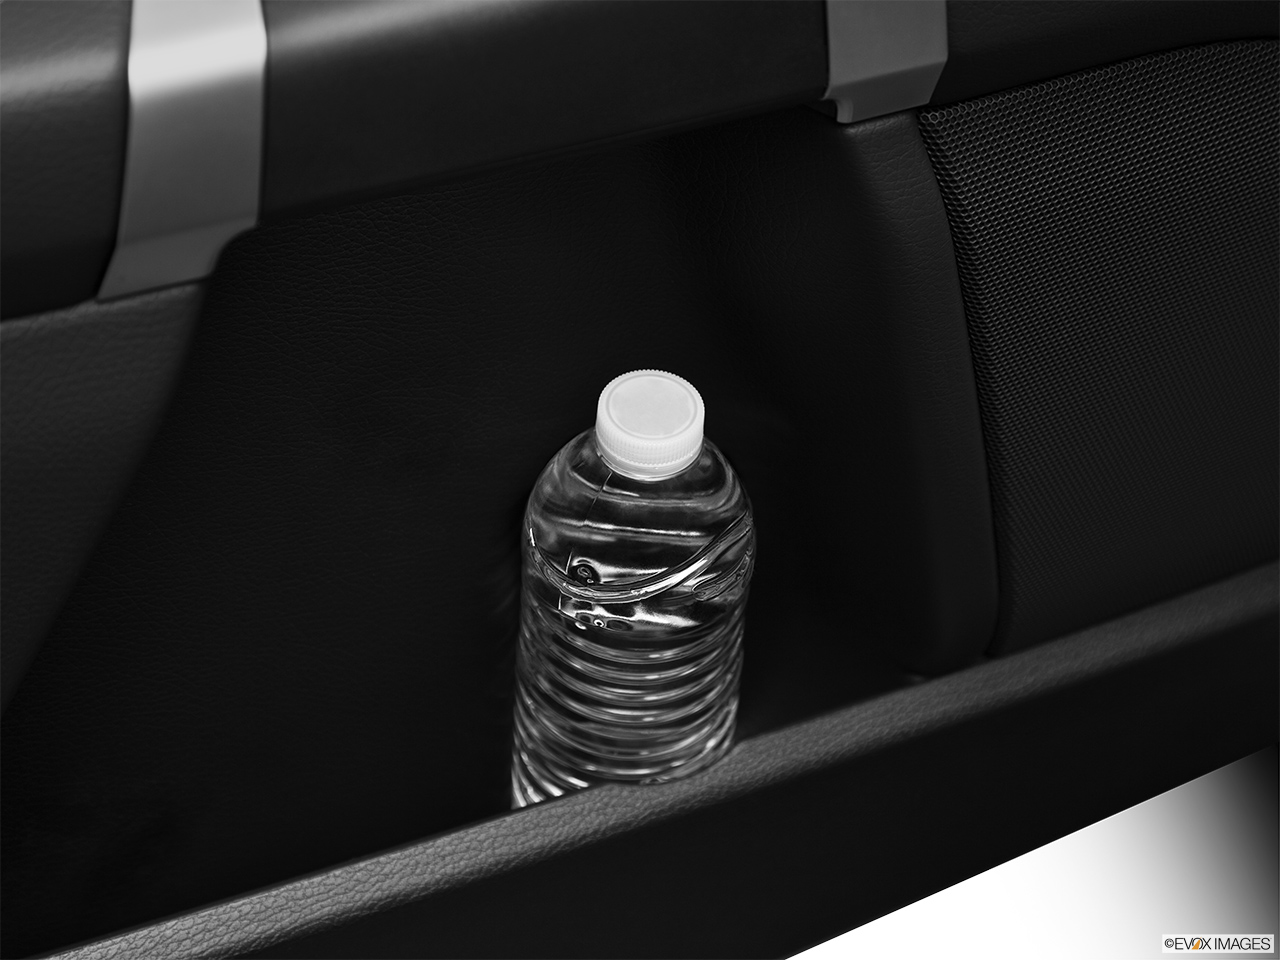 2012 Volvo XC90 R-Design Second row side cup holder with coffee prop, or second row door cup holder with water bottle. 